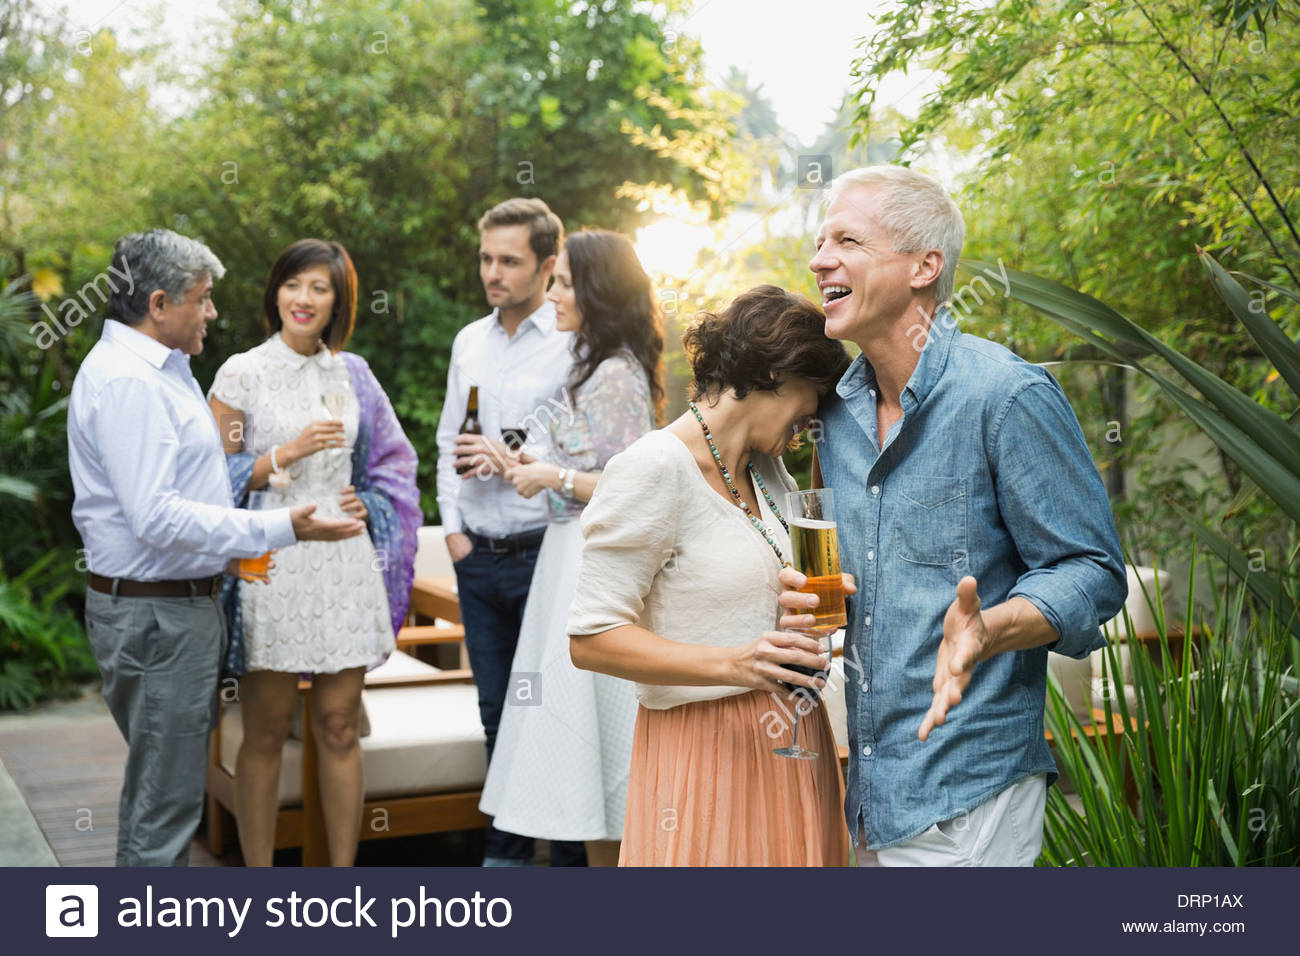 Couple with drinks at outdoor party Stock Photo